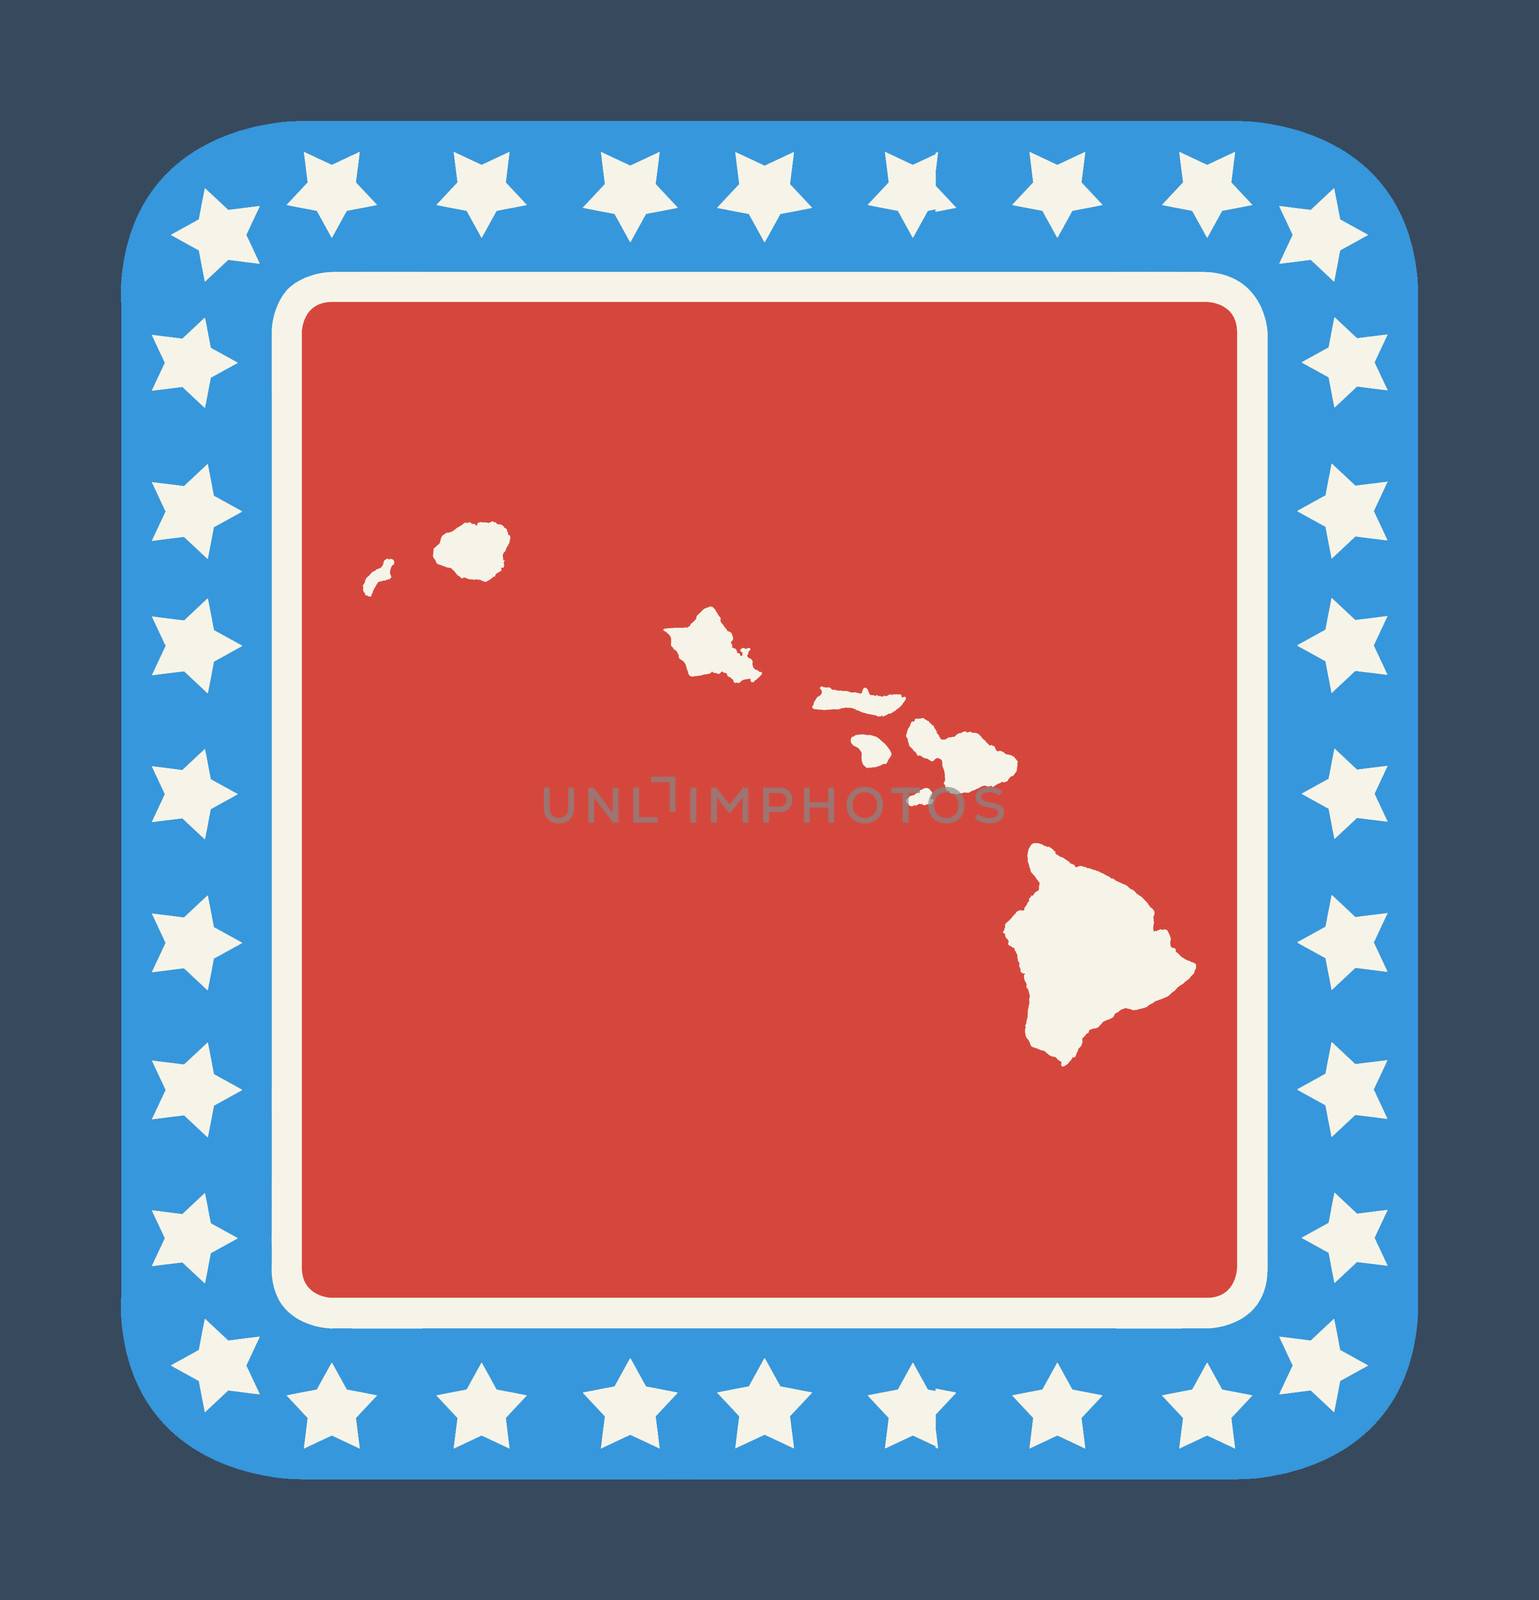 Hawaii state button on American flag in flat web design style, isolated on white background.